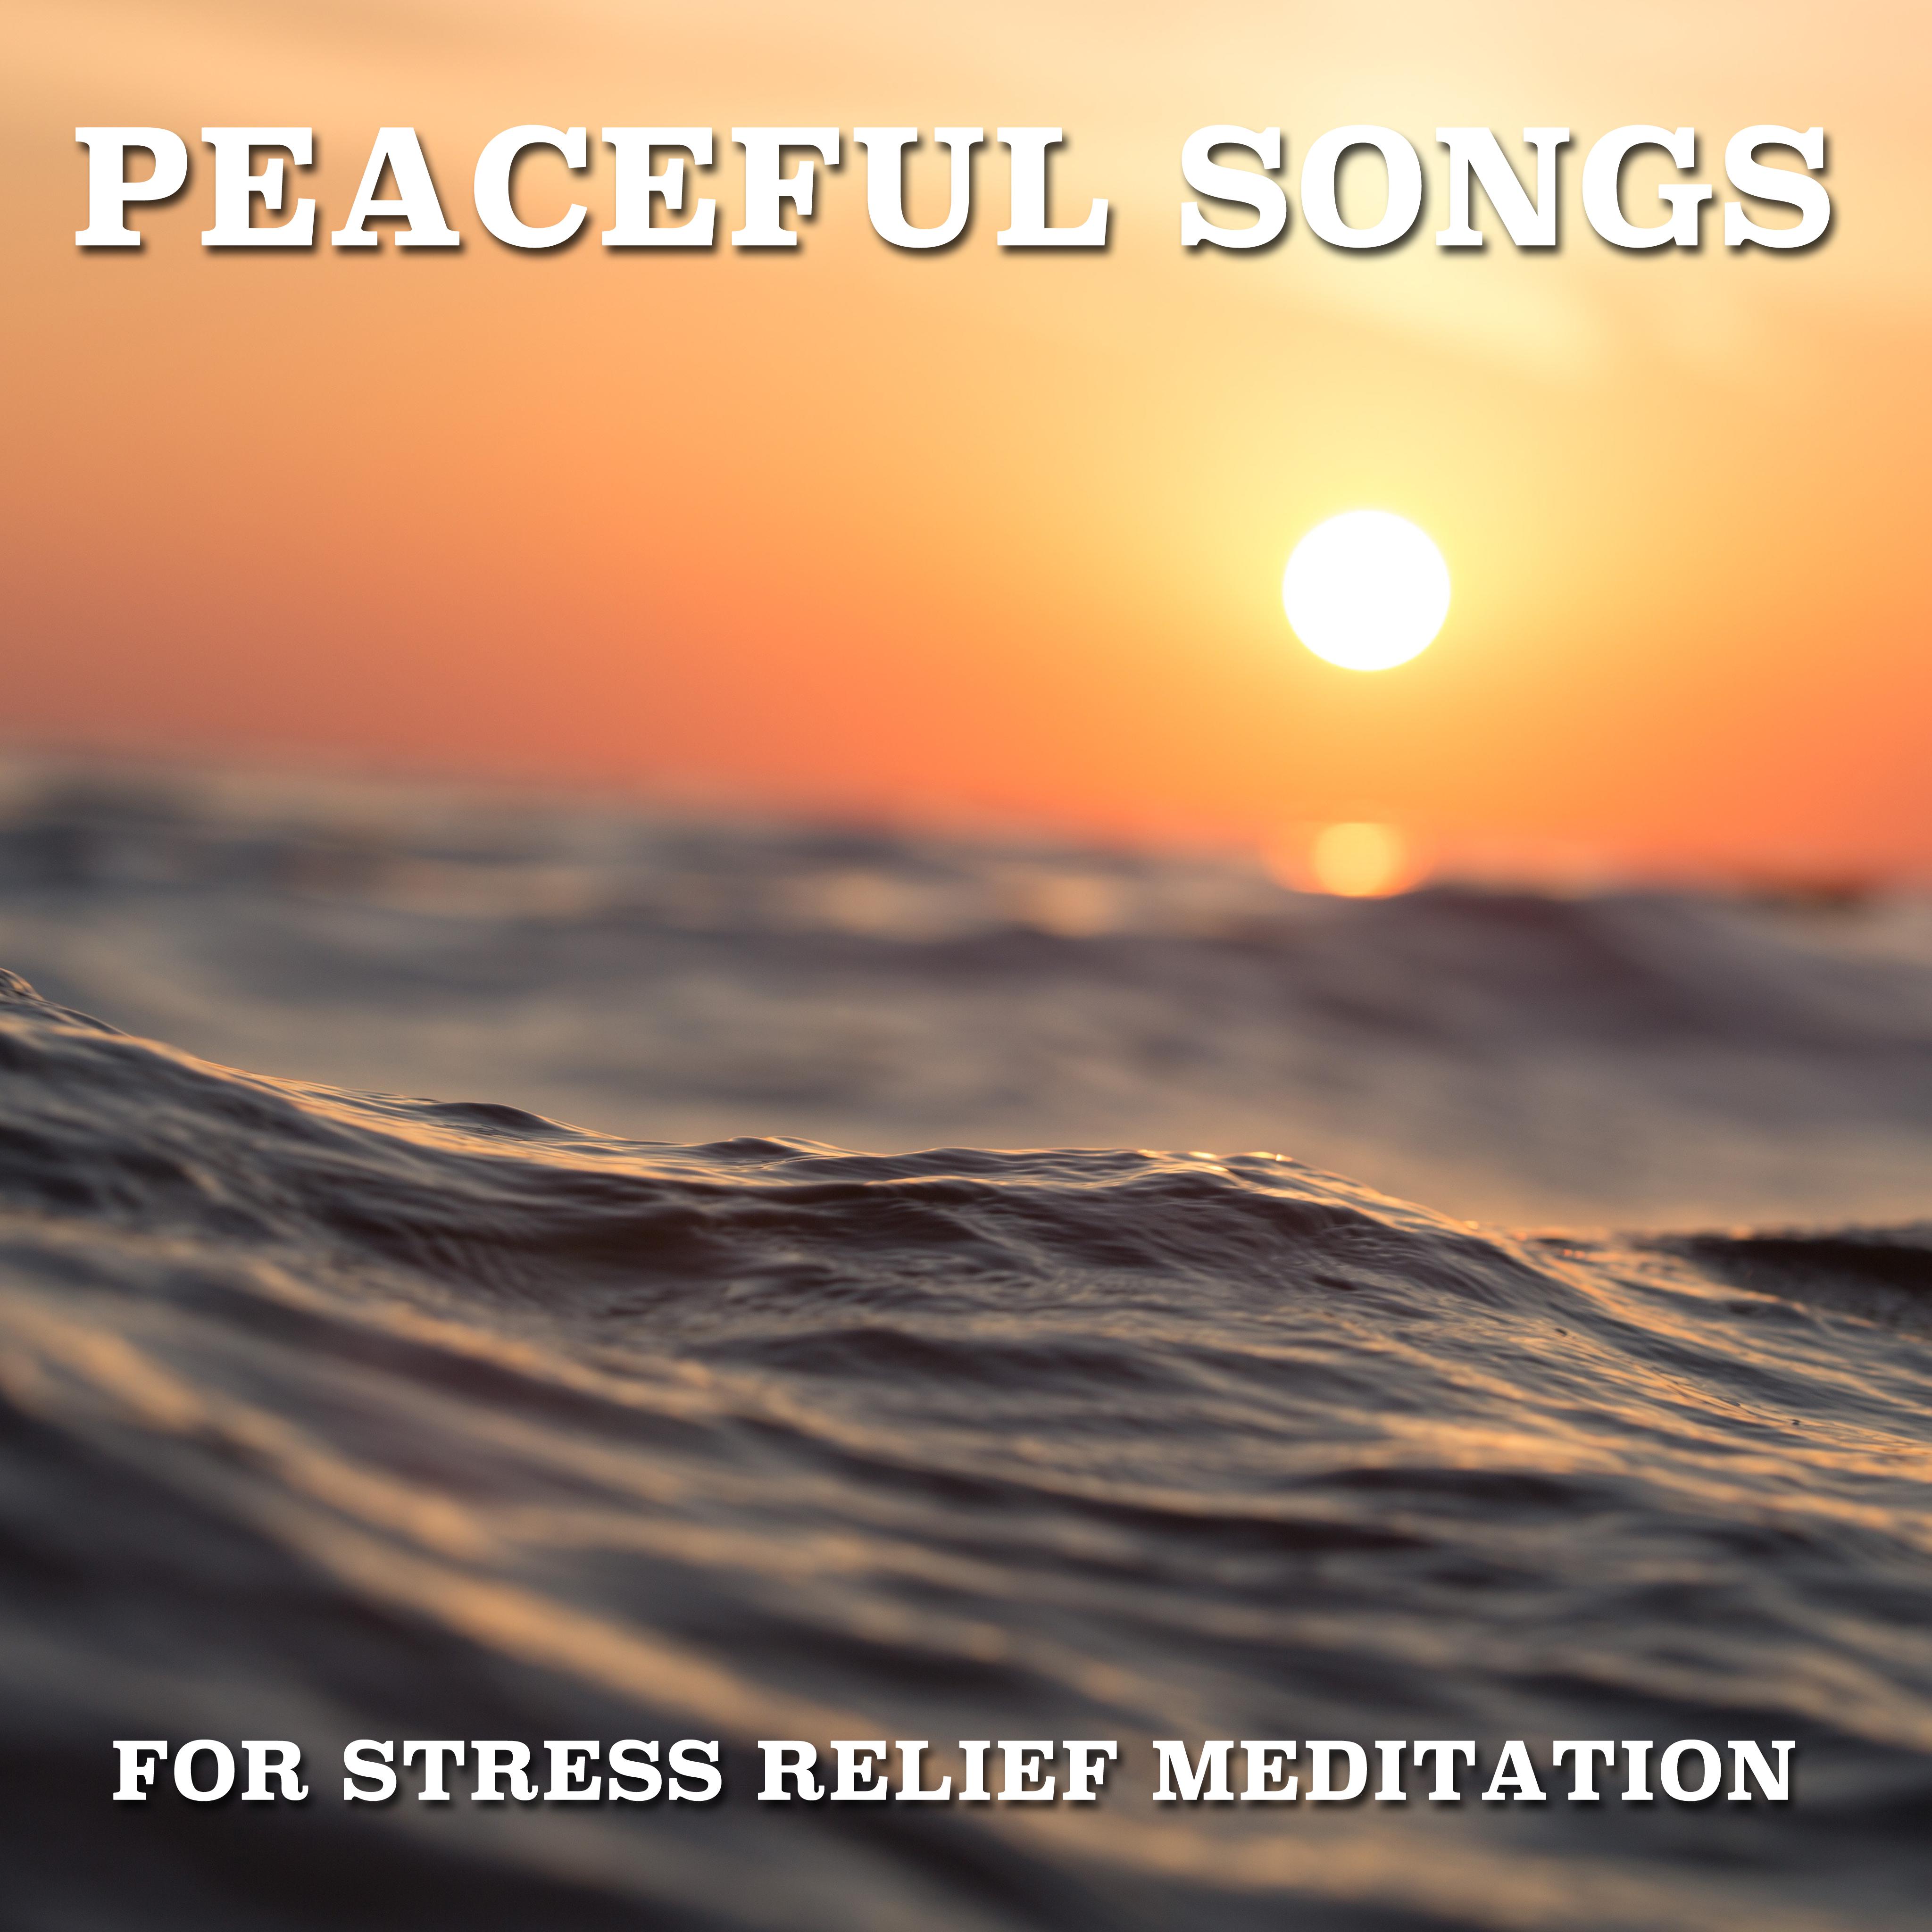 14 Peaceful Songs for Stress Relief Meditation